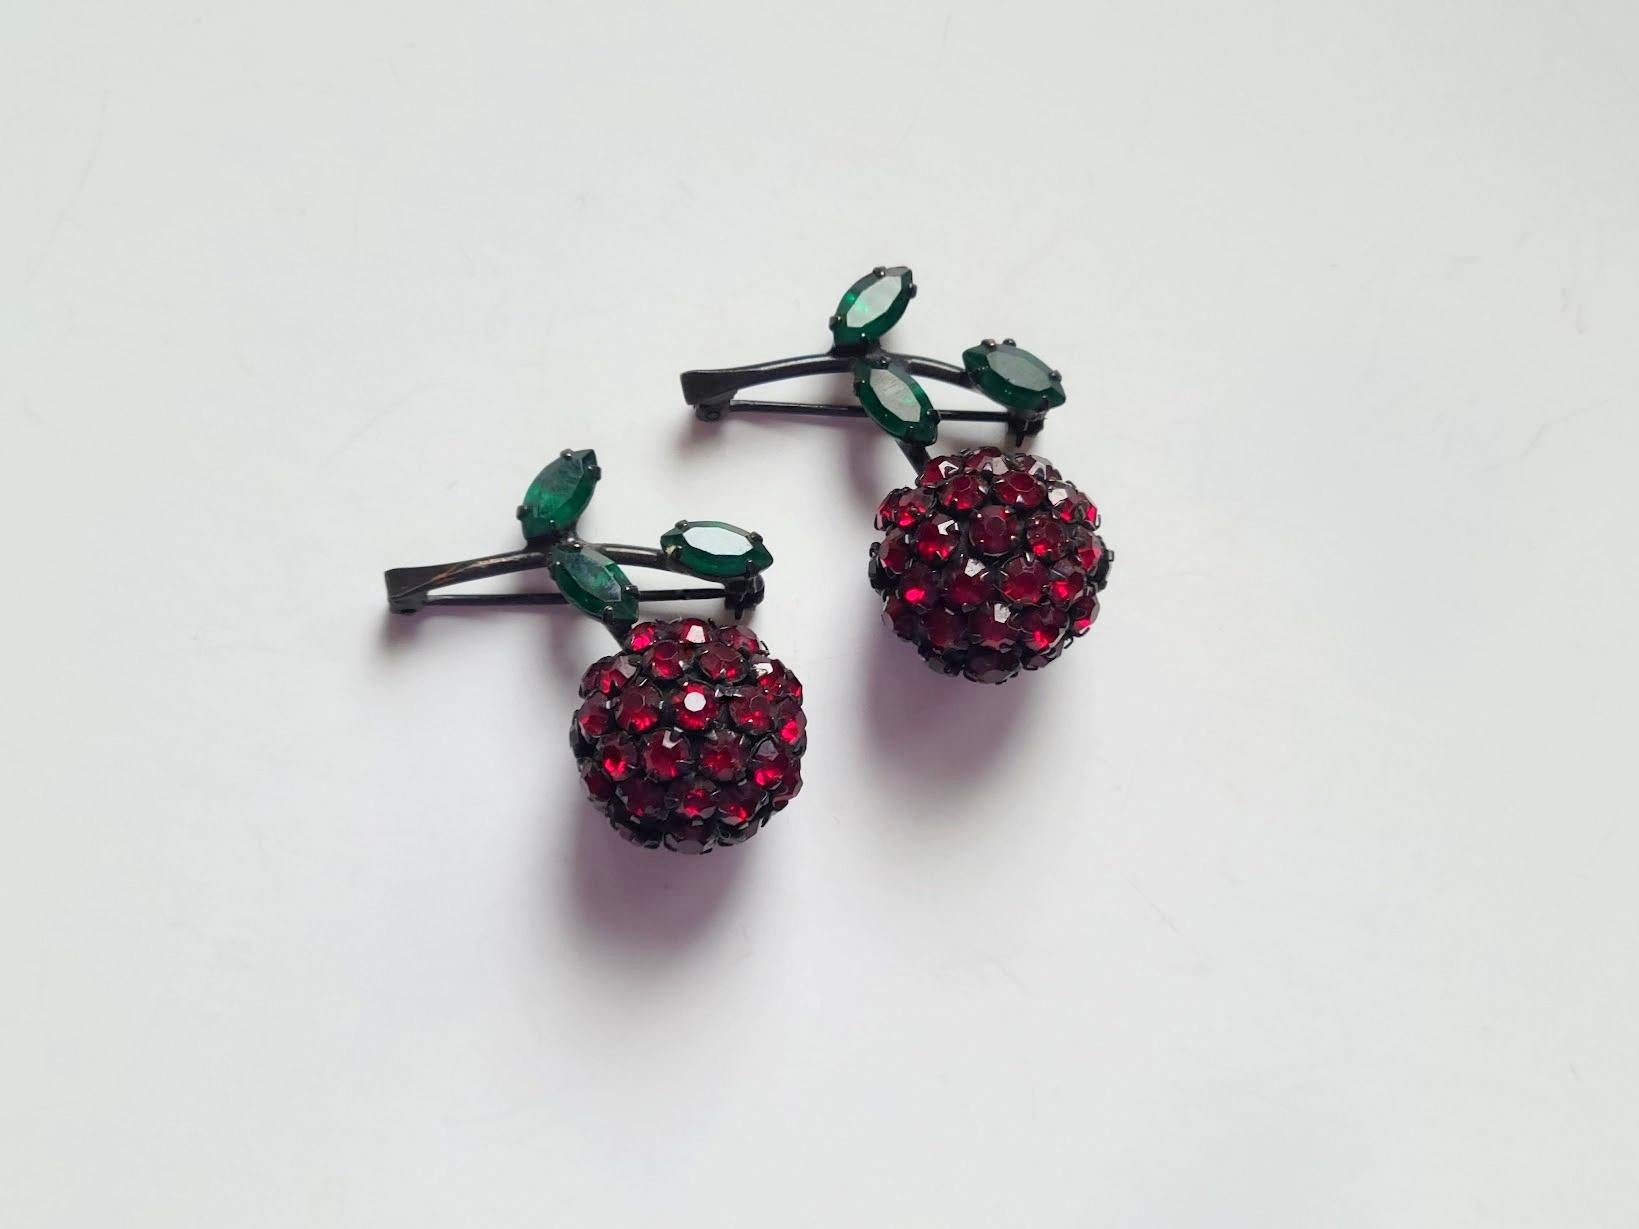 This is a two vintage rhinestone cherry brooches with green leaves from Warner, circa 1960s.
Set with garnet rhinestone chatons (the head of a ring in which a stone is set) for the cherry and green marquis cut rhinestones for the leaves on a black,